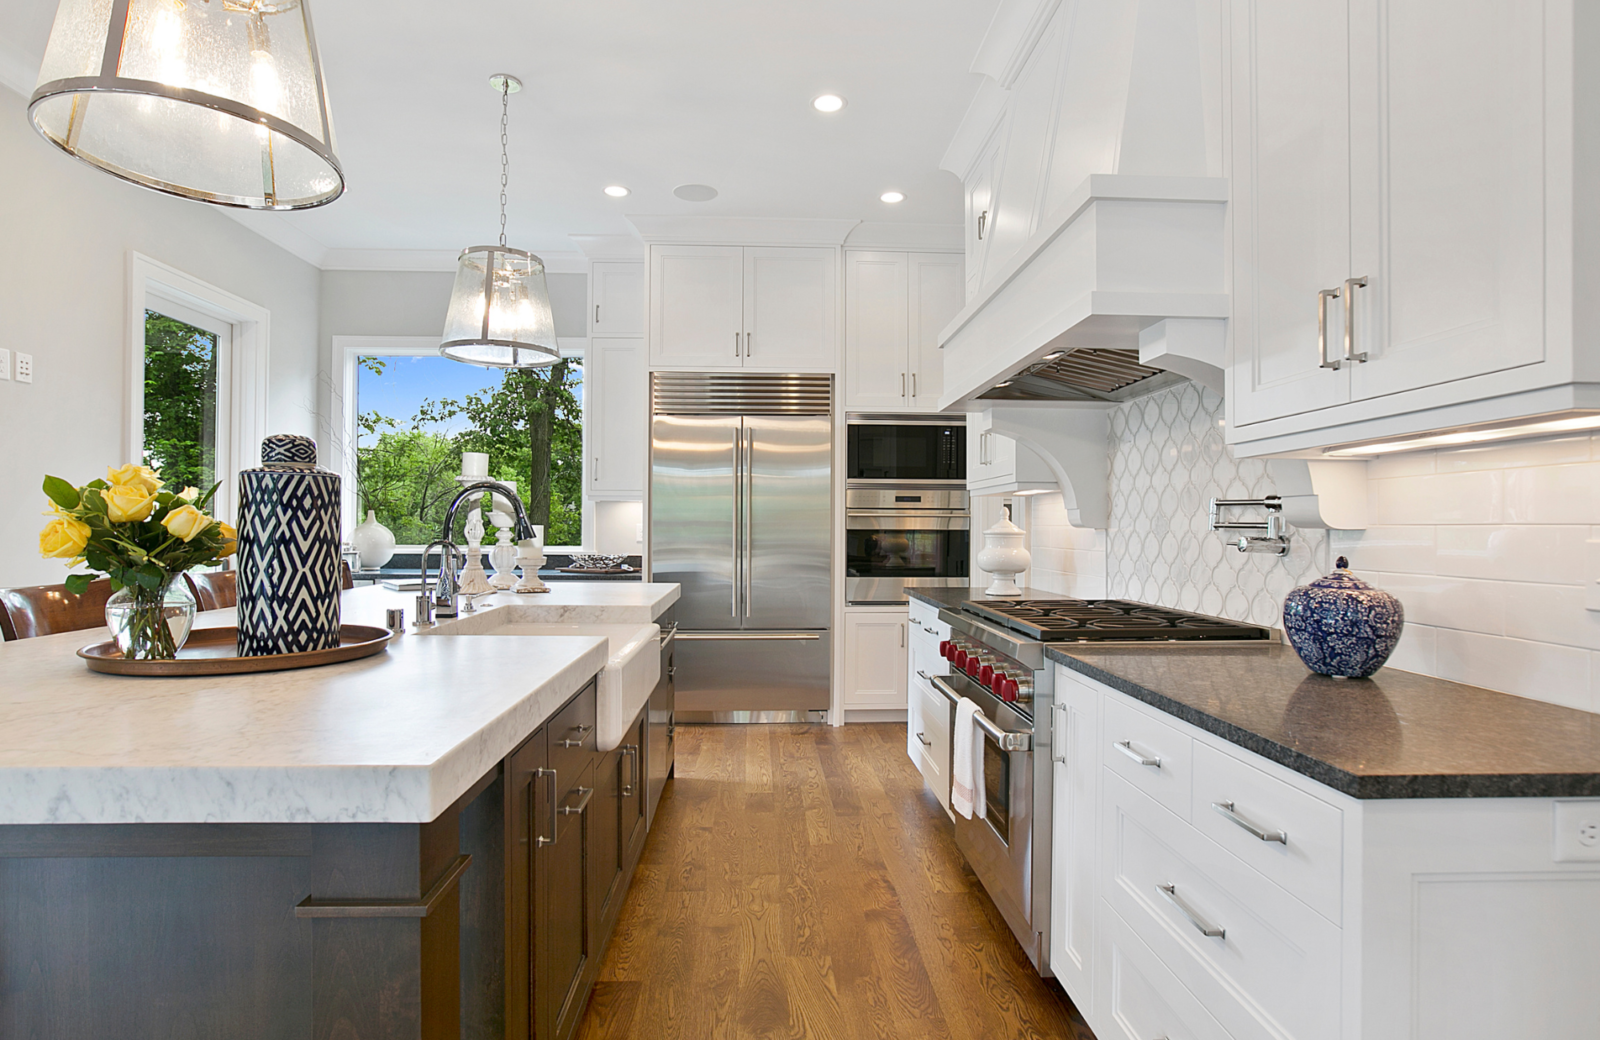 designer-on-call-west-hollywood-ca-how-to-prepare-for-your-interior-design-consult-luxury-kitchen-with-large-island-white-cabinetry-contemporary